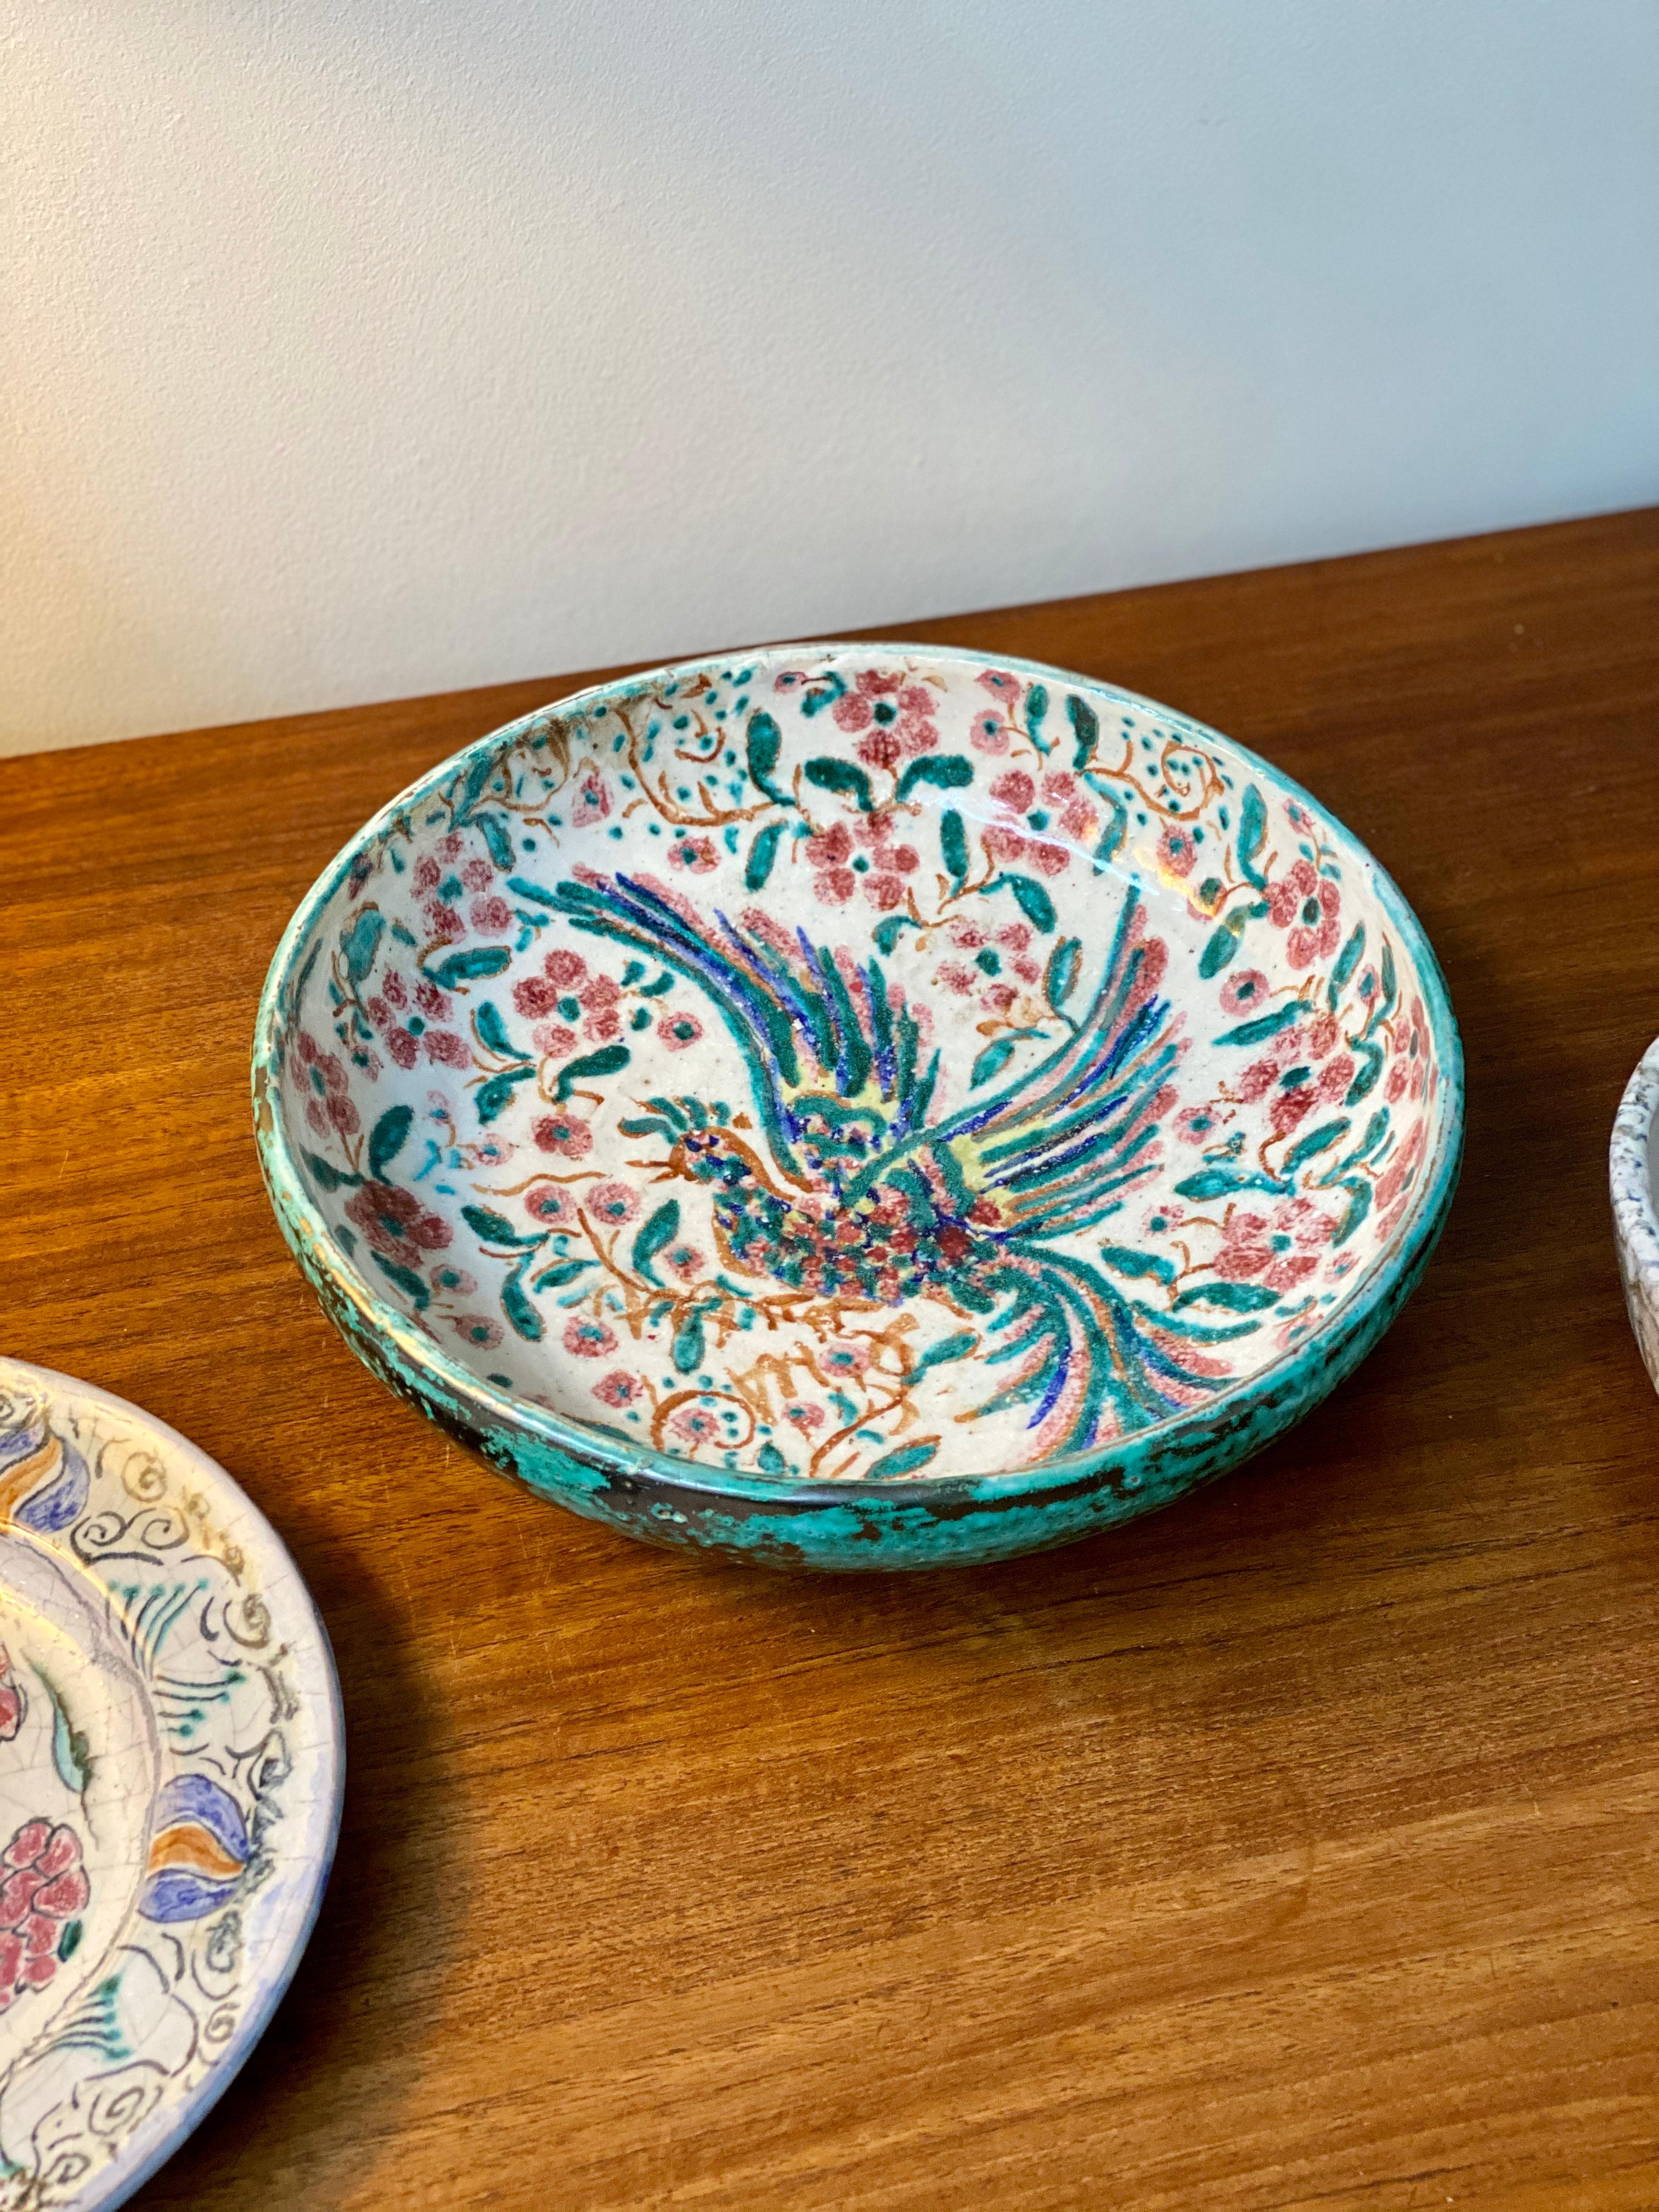 French Iznik-inspired ceramic bowl by Édouard Cazaux (circa 1930s). Master ceramicist, Édouard Cazaux was inspired by antiquities, religion and animal life in his creations. This magnificently decorated ceramic bowl displays an Iznik-styled phoenix